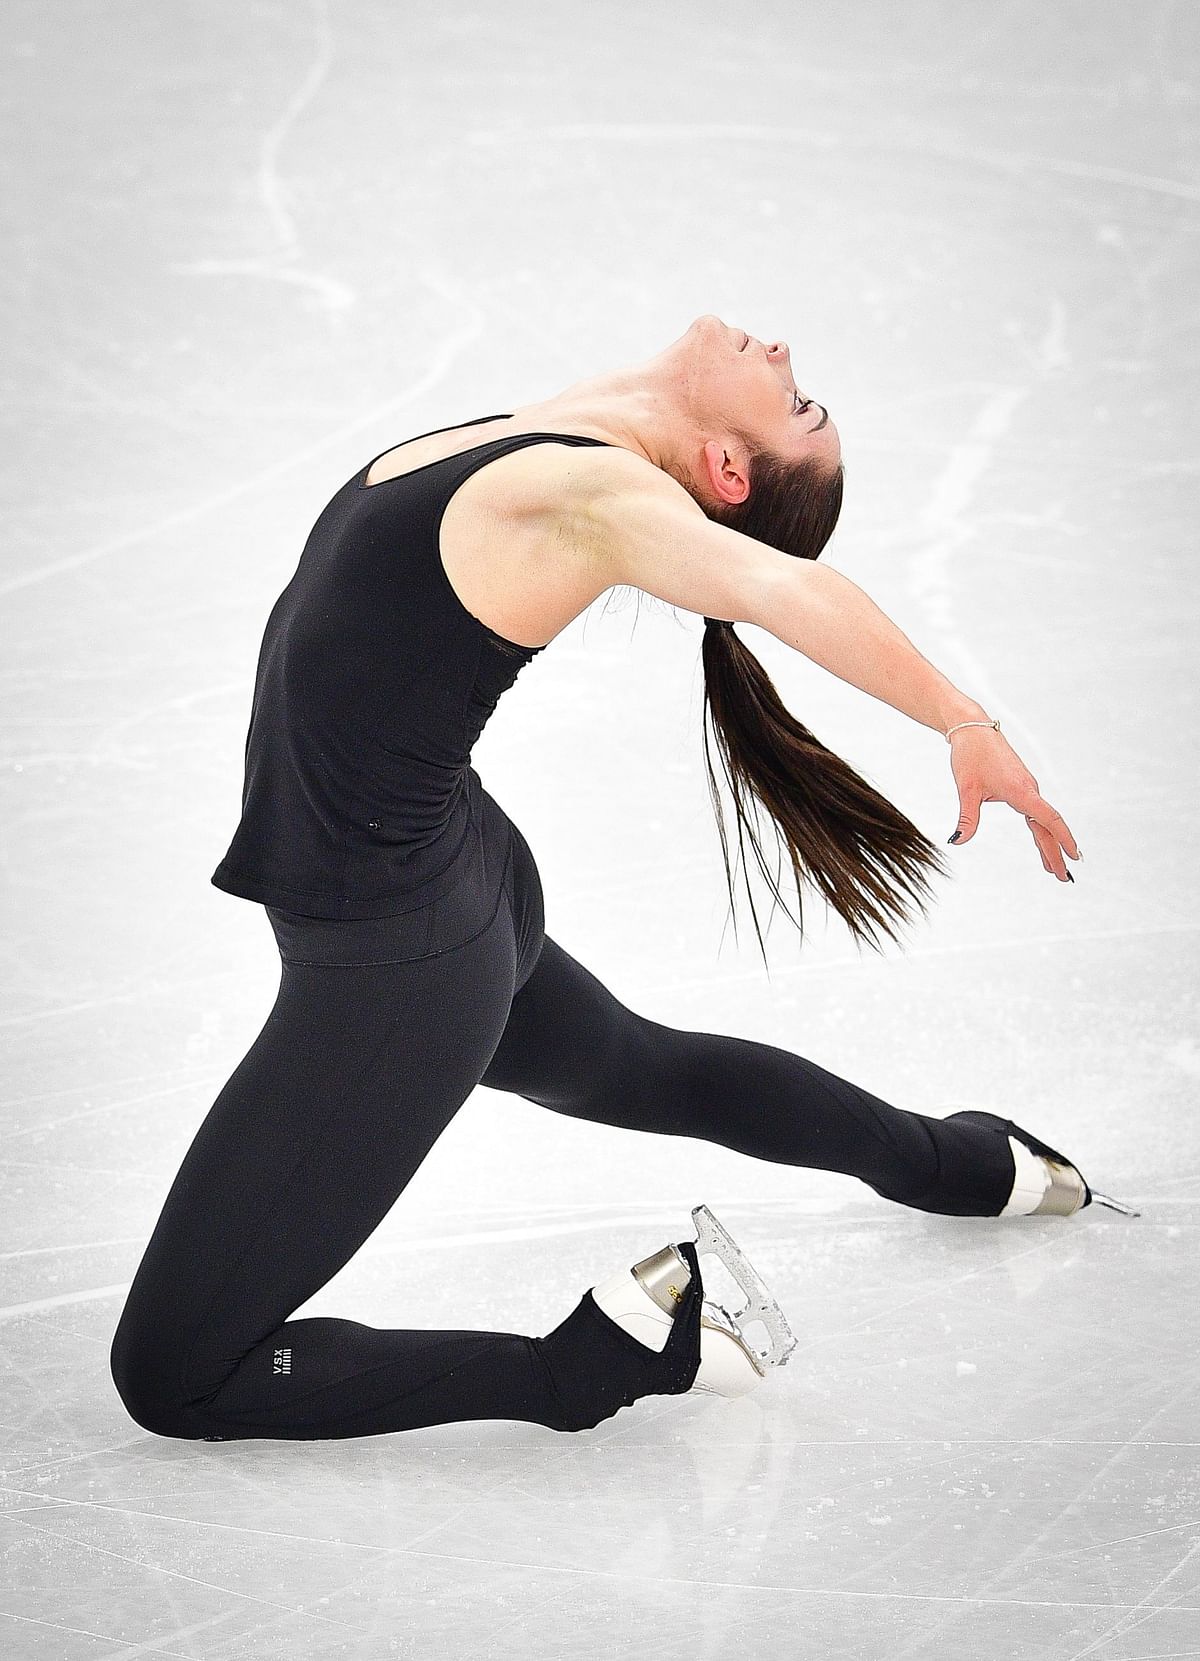 Canadian figure skater Kaetlyn Osmond practises at Gangneung Ice Arena ahead of the women figure skating competition of the Pyeongchang 2018 Winter Olympic Games on 8 February 2018. Photo:AFP